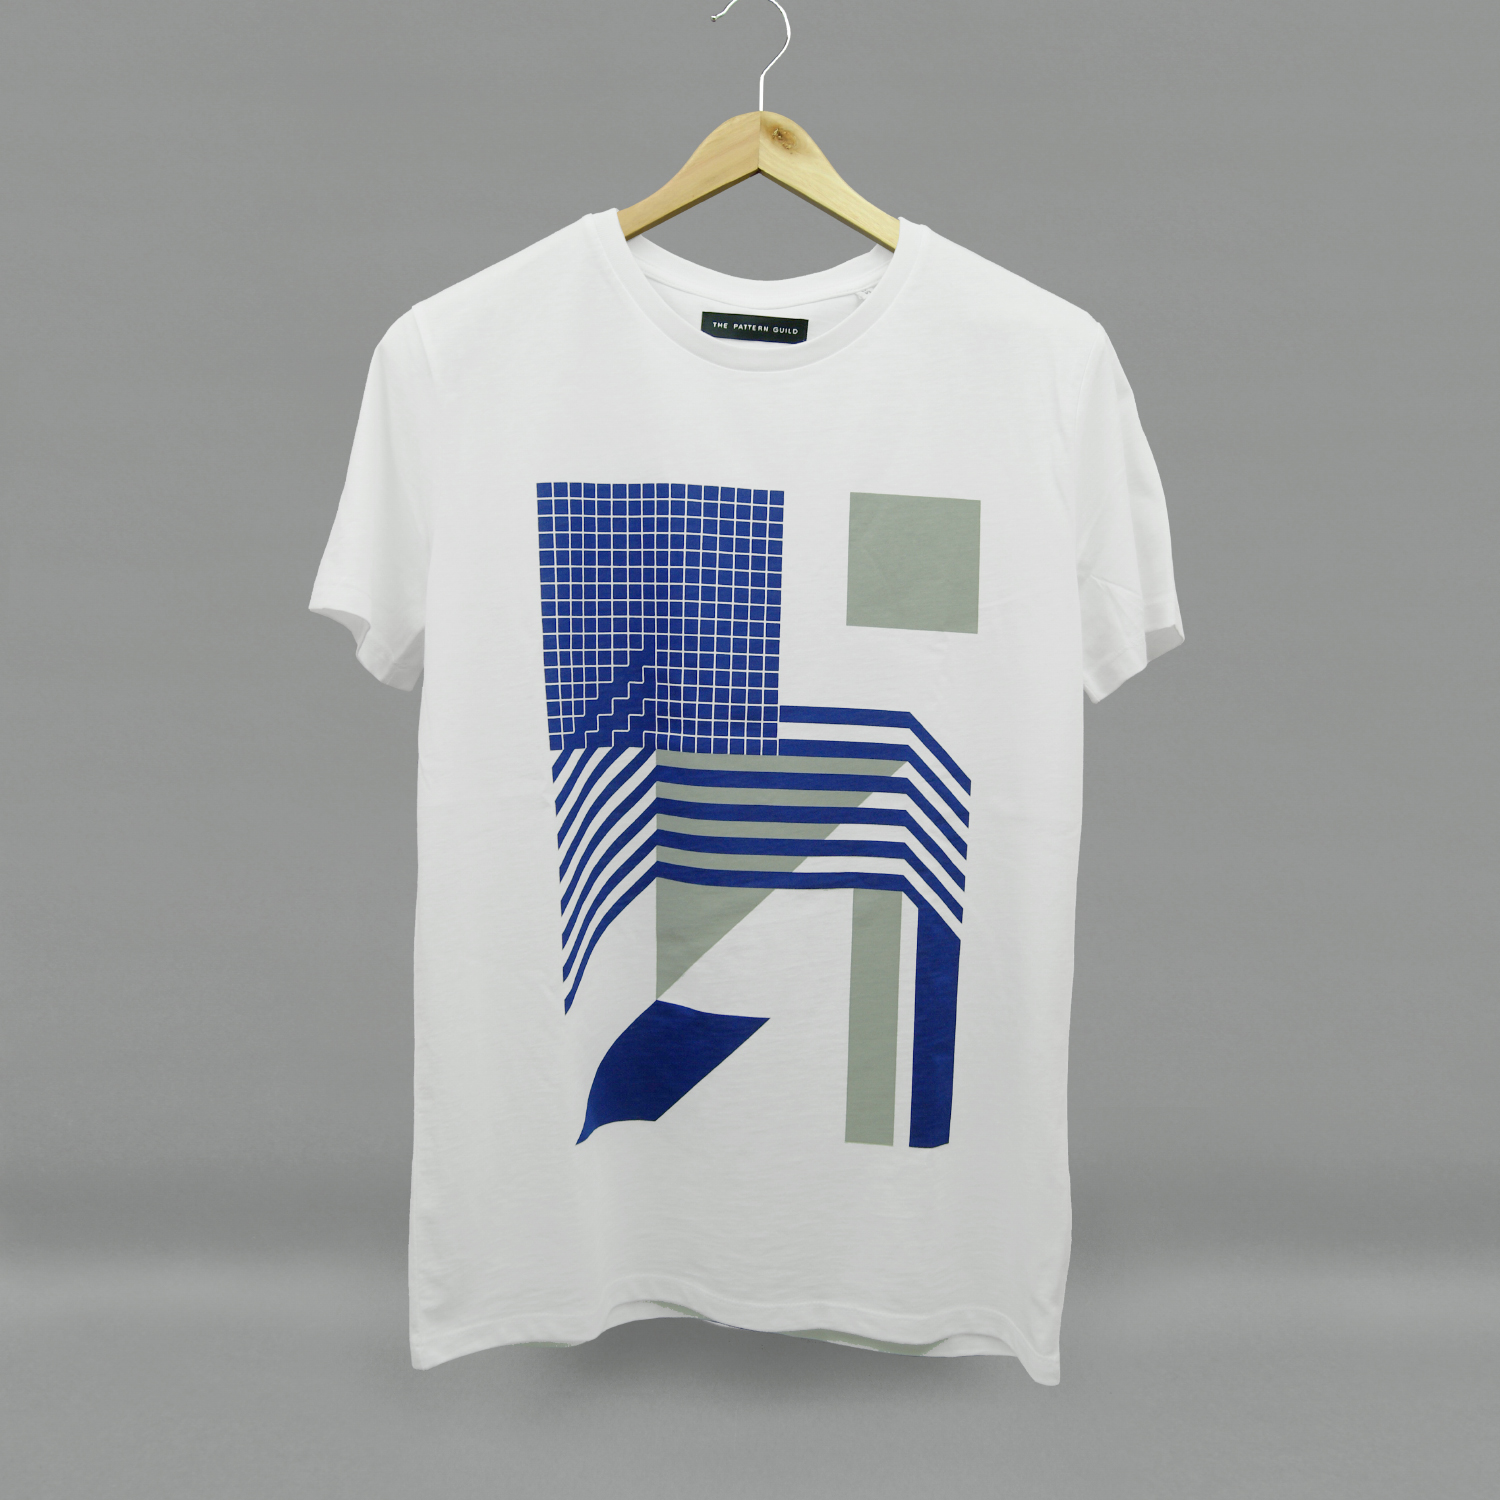 thepatternguild_t-shirt_abstract1.jpg